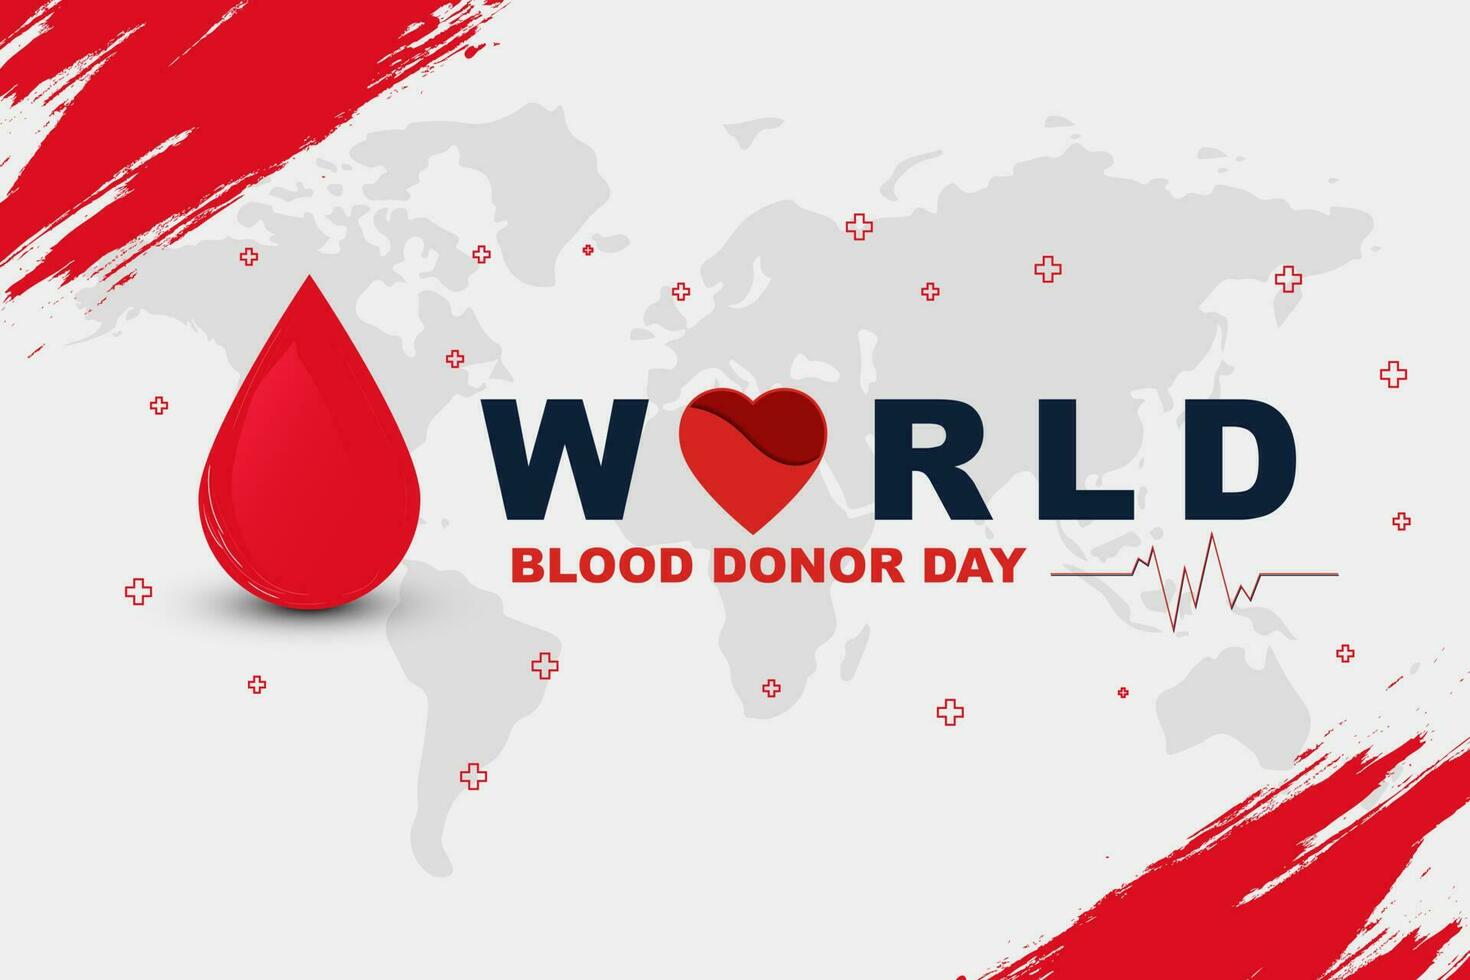 World blood donor day June 14th, greeting card or poster design, flat vector illustration